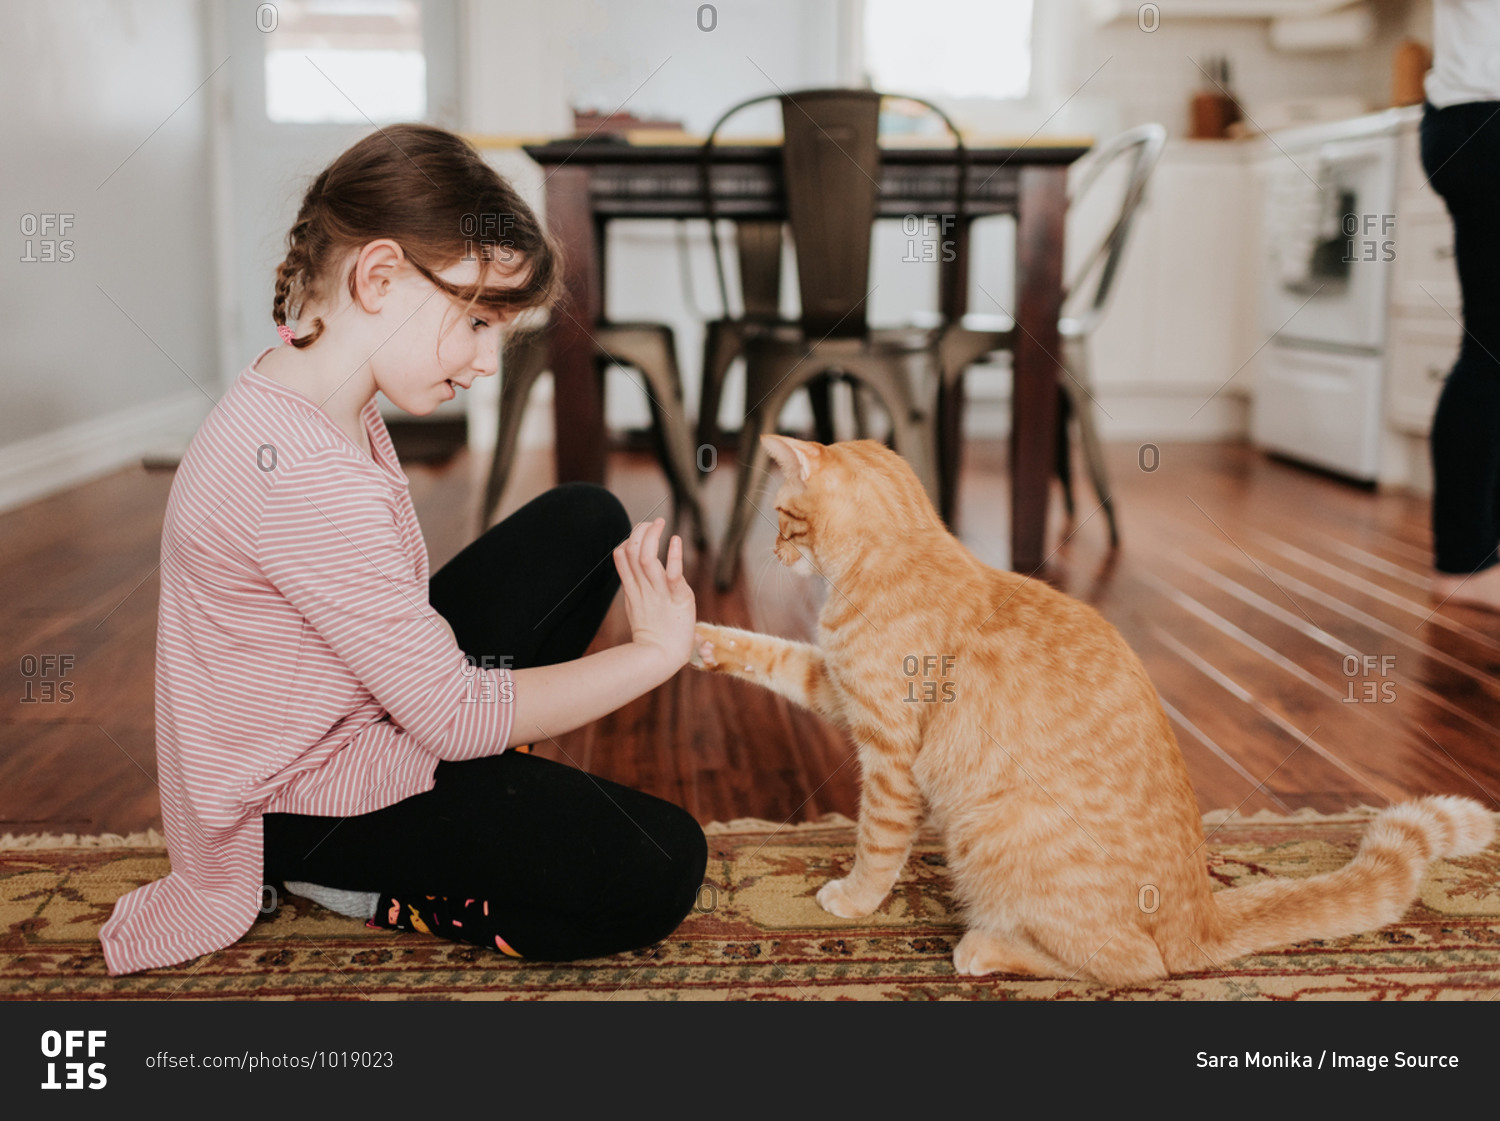 Girl playing with cat at home